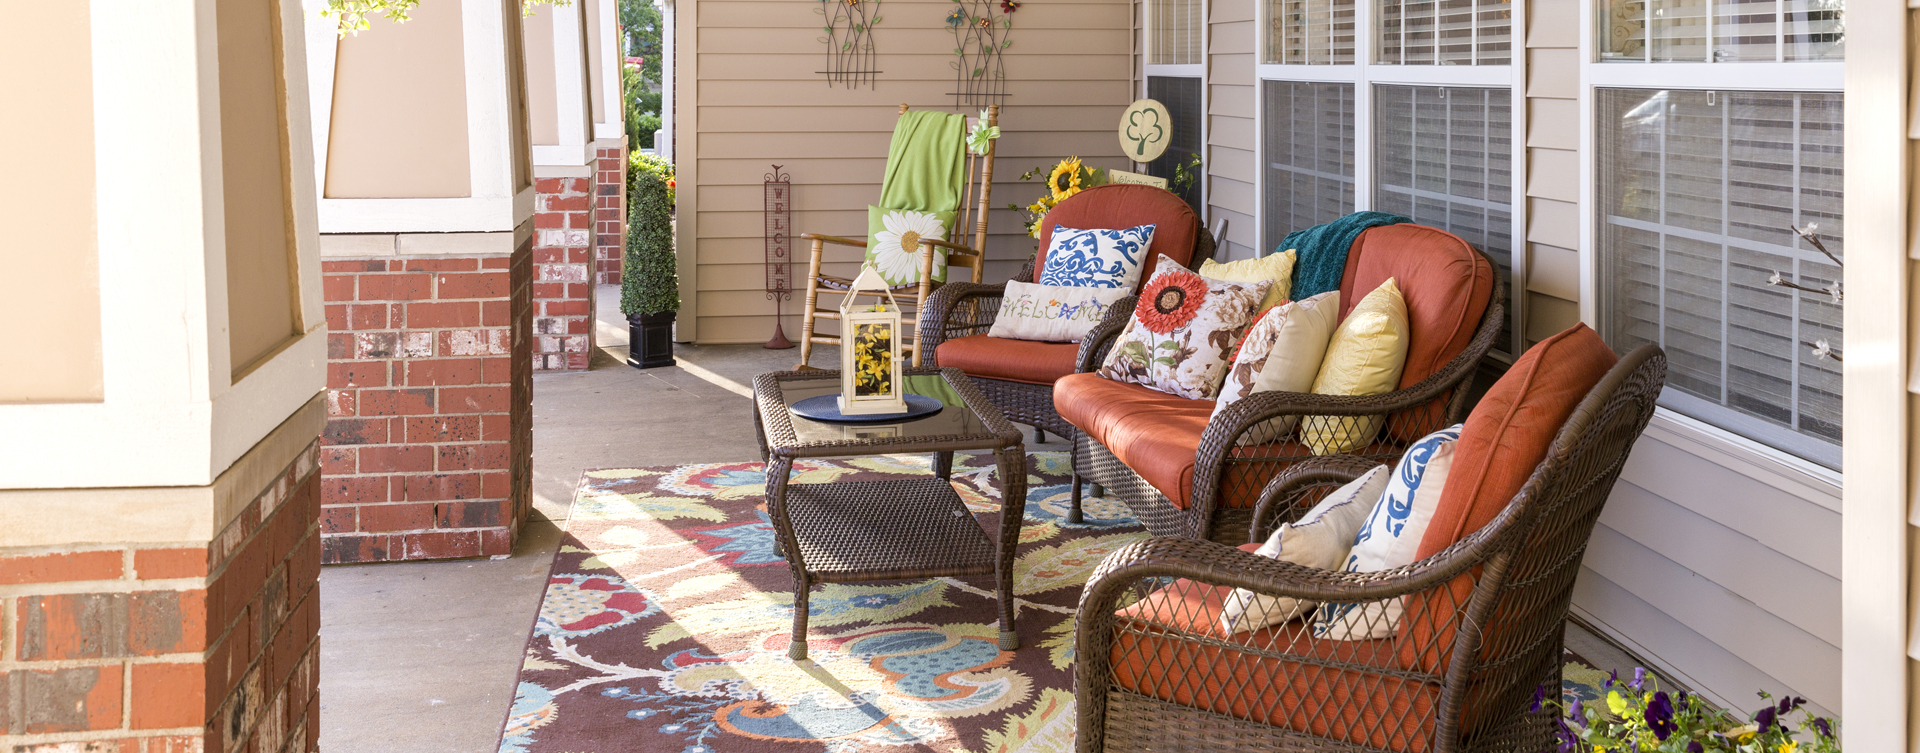 Sip on your favorite drink on the porch at Bickford of Omaha - Hickory